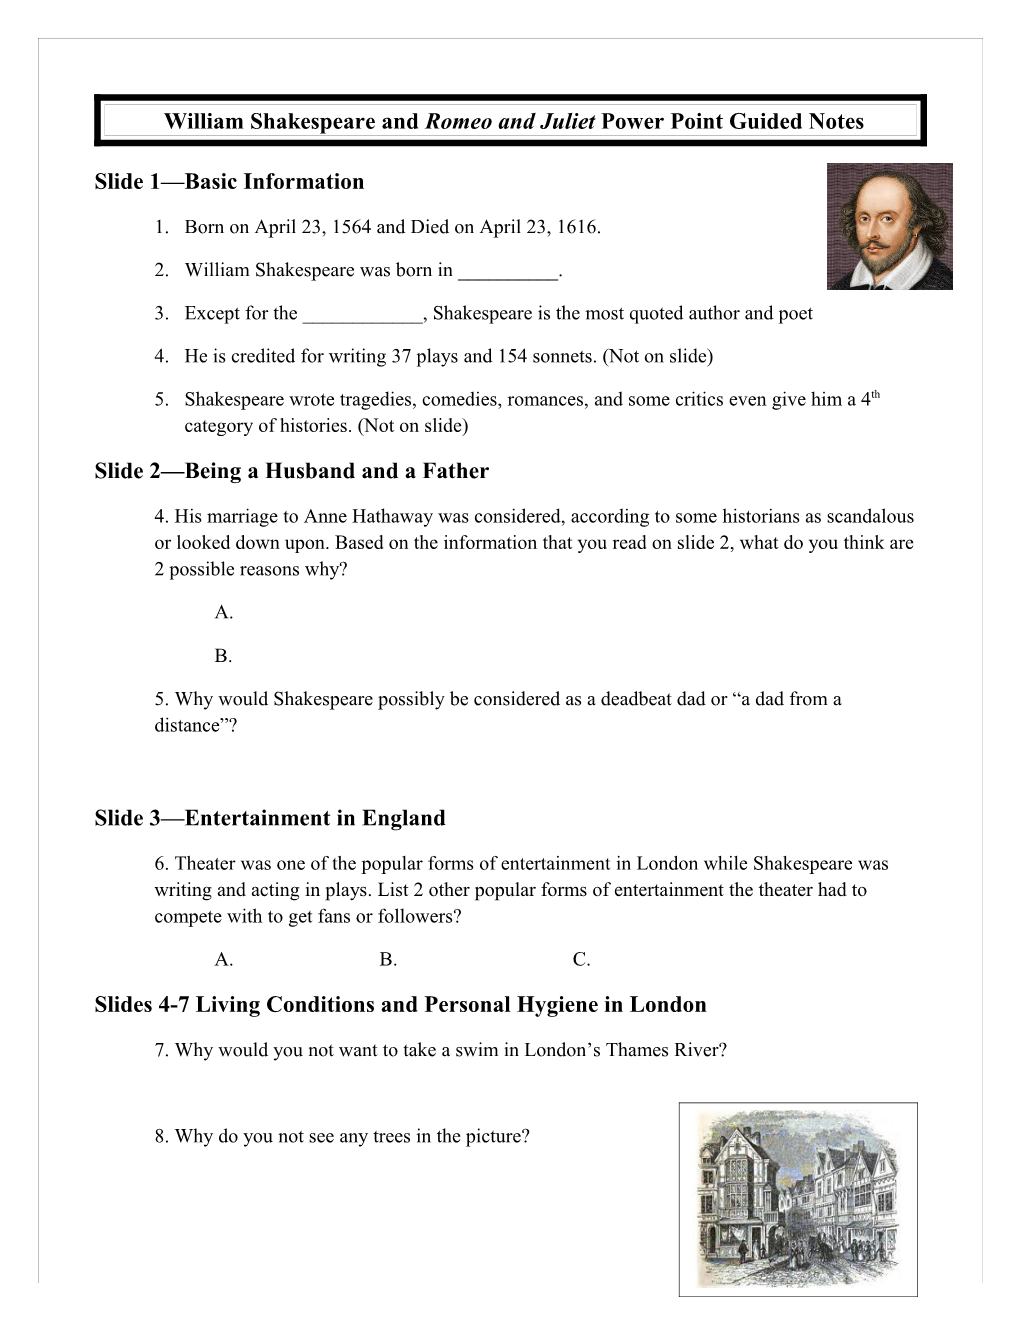 William Shakespeare and Romeo and Juliet Power Point Guided Notes